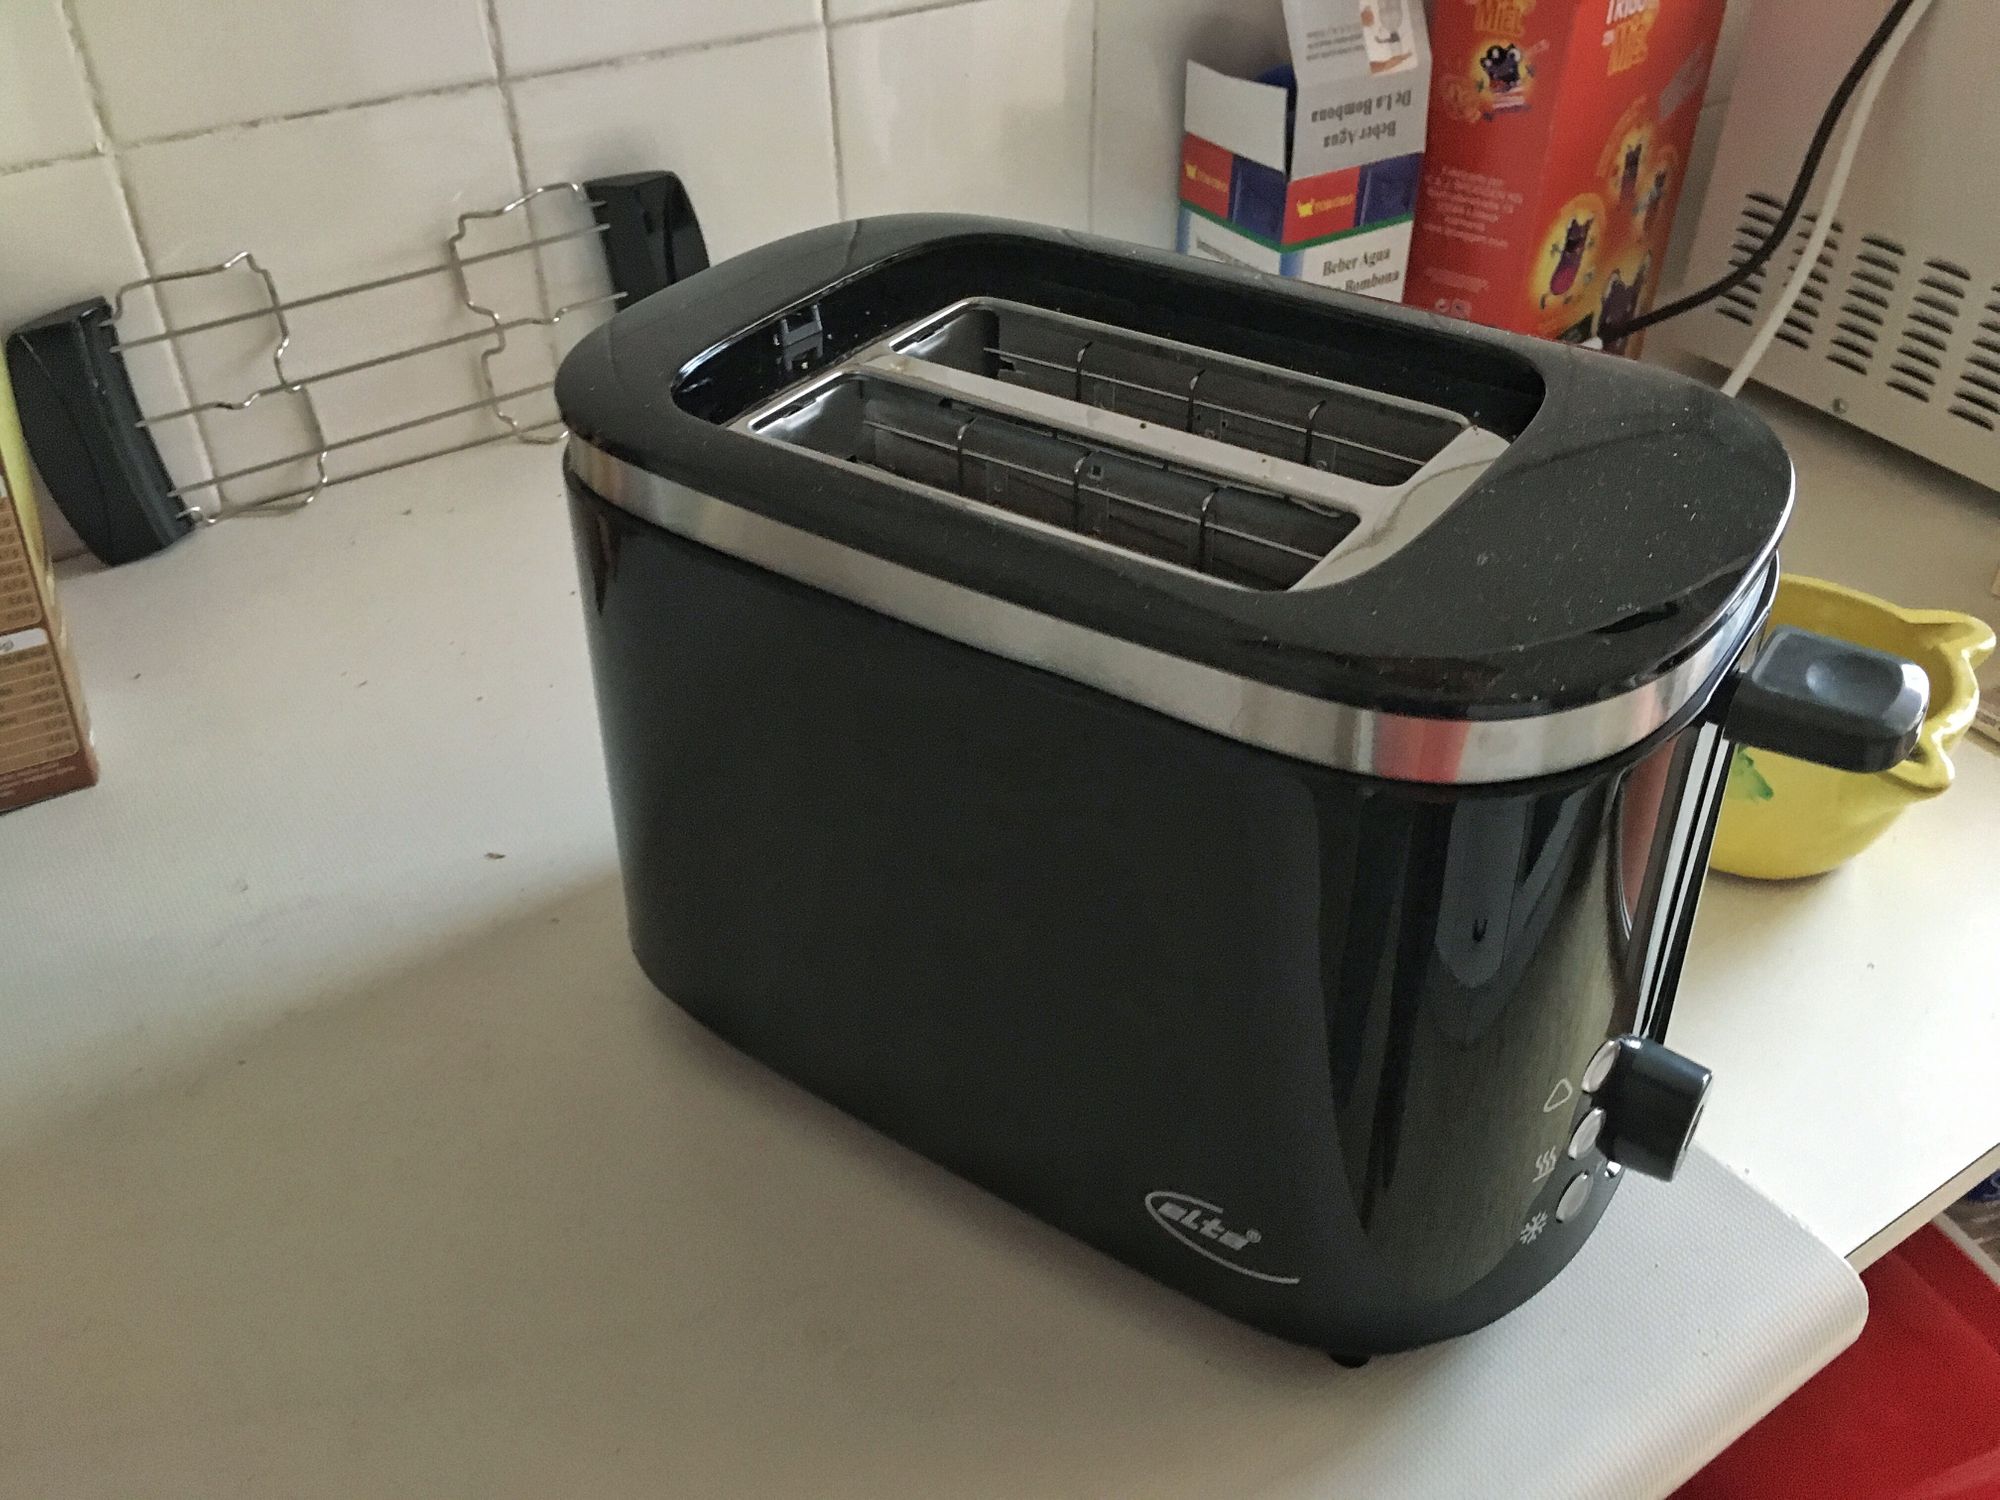 I bought a toaster